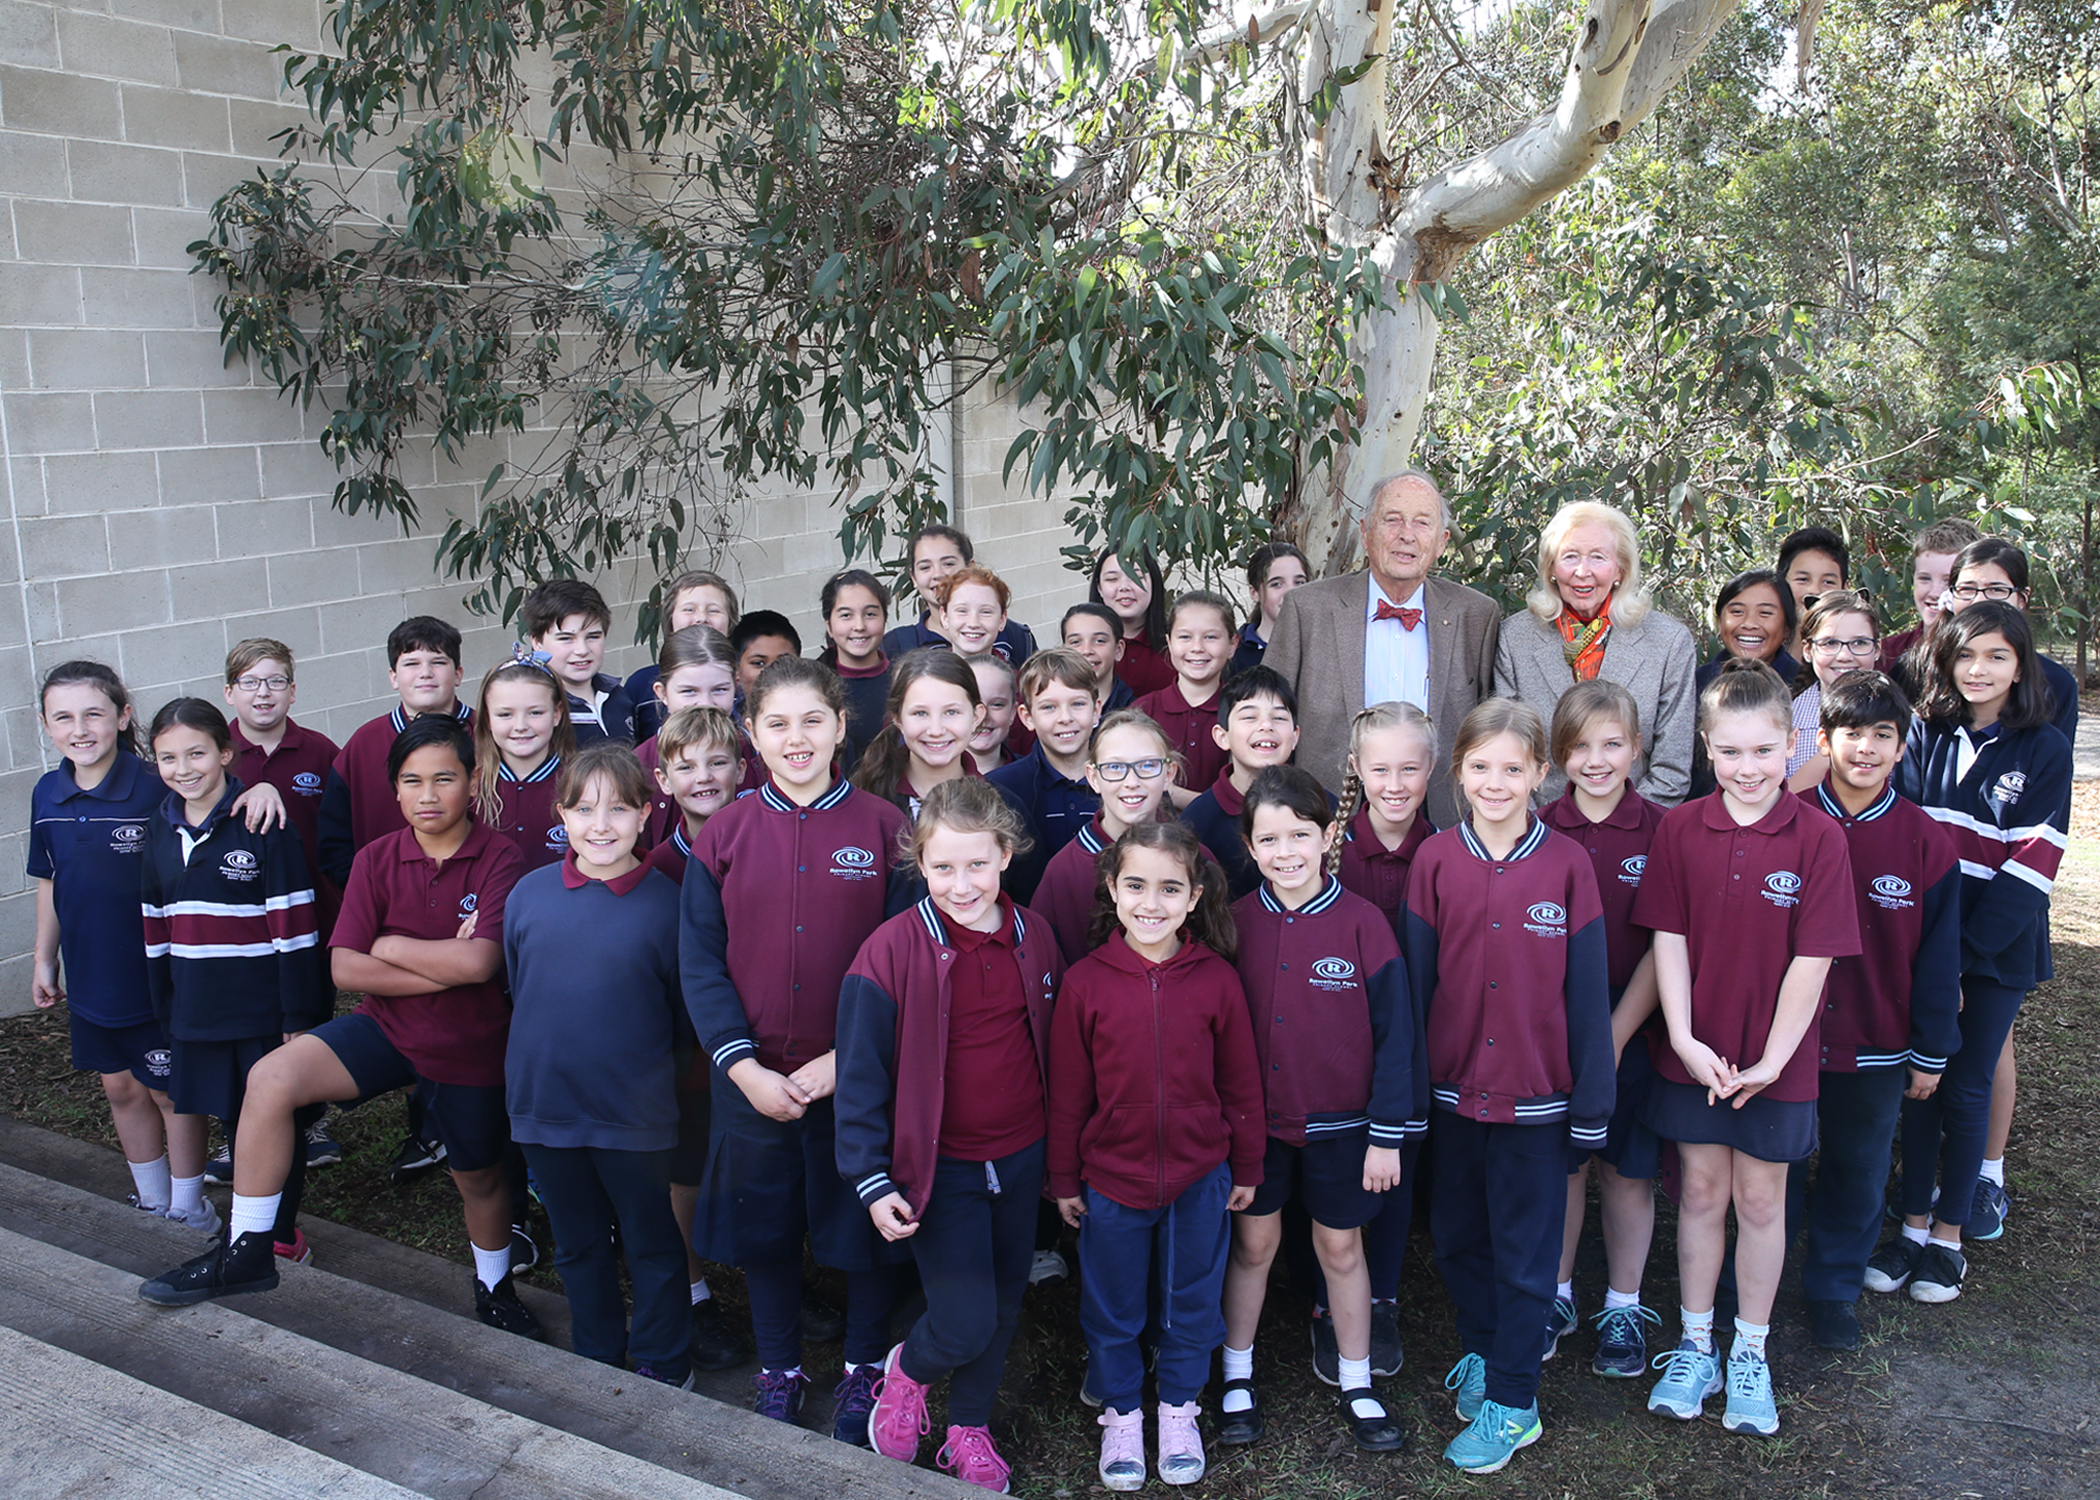 Baillieu Myer AC, Sarah Myer and students from Rowellyn Park Primary School in Carrum Downs were among those at the turning of the sod for the new pavilion and terrace at McClelland Sculpture Park+Gallery.